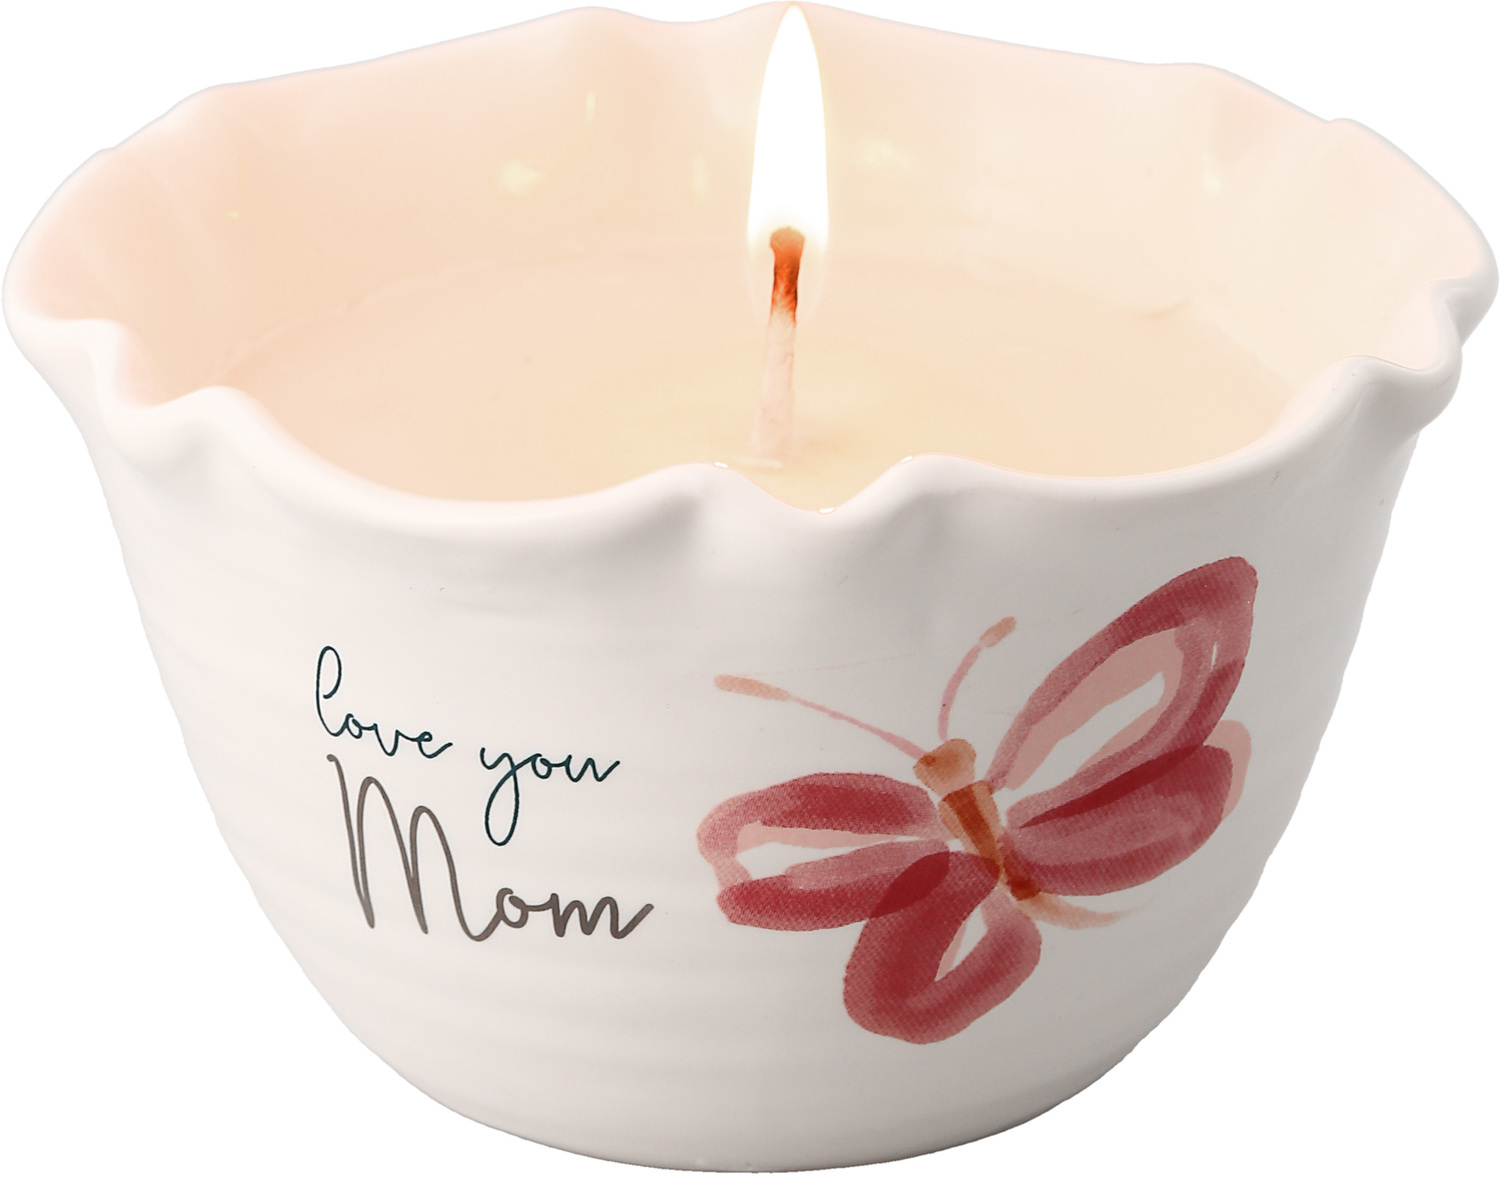 Mom by Rosy Heart - Mom - 9 oz - 100% Soy Wax Candle
Scent: Tranquility